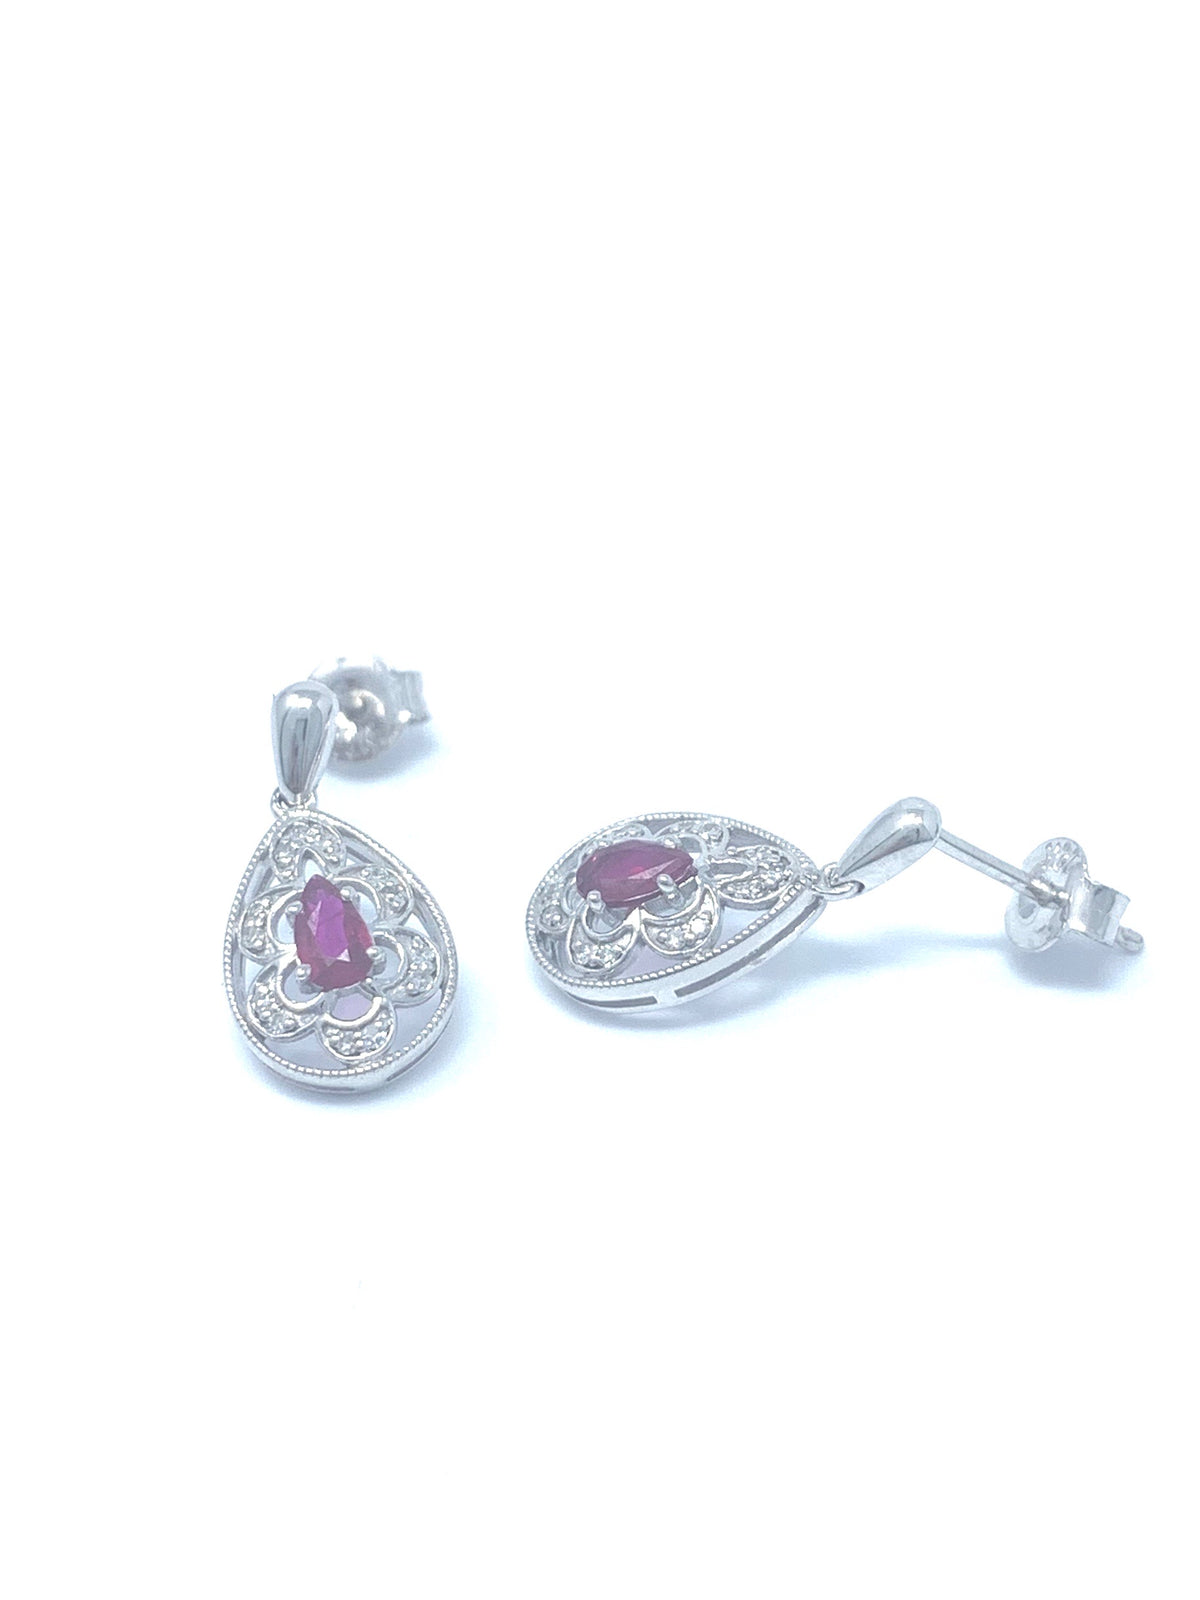 10K White Gold 0.55cttw Genuine Ruby and 0.11cttw Diamond Earrings